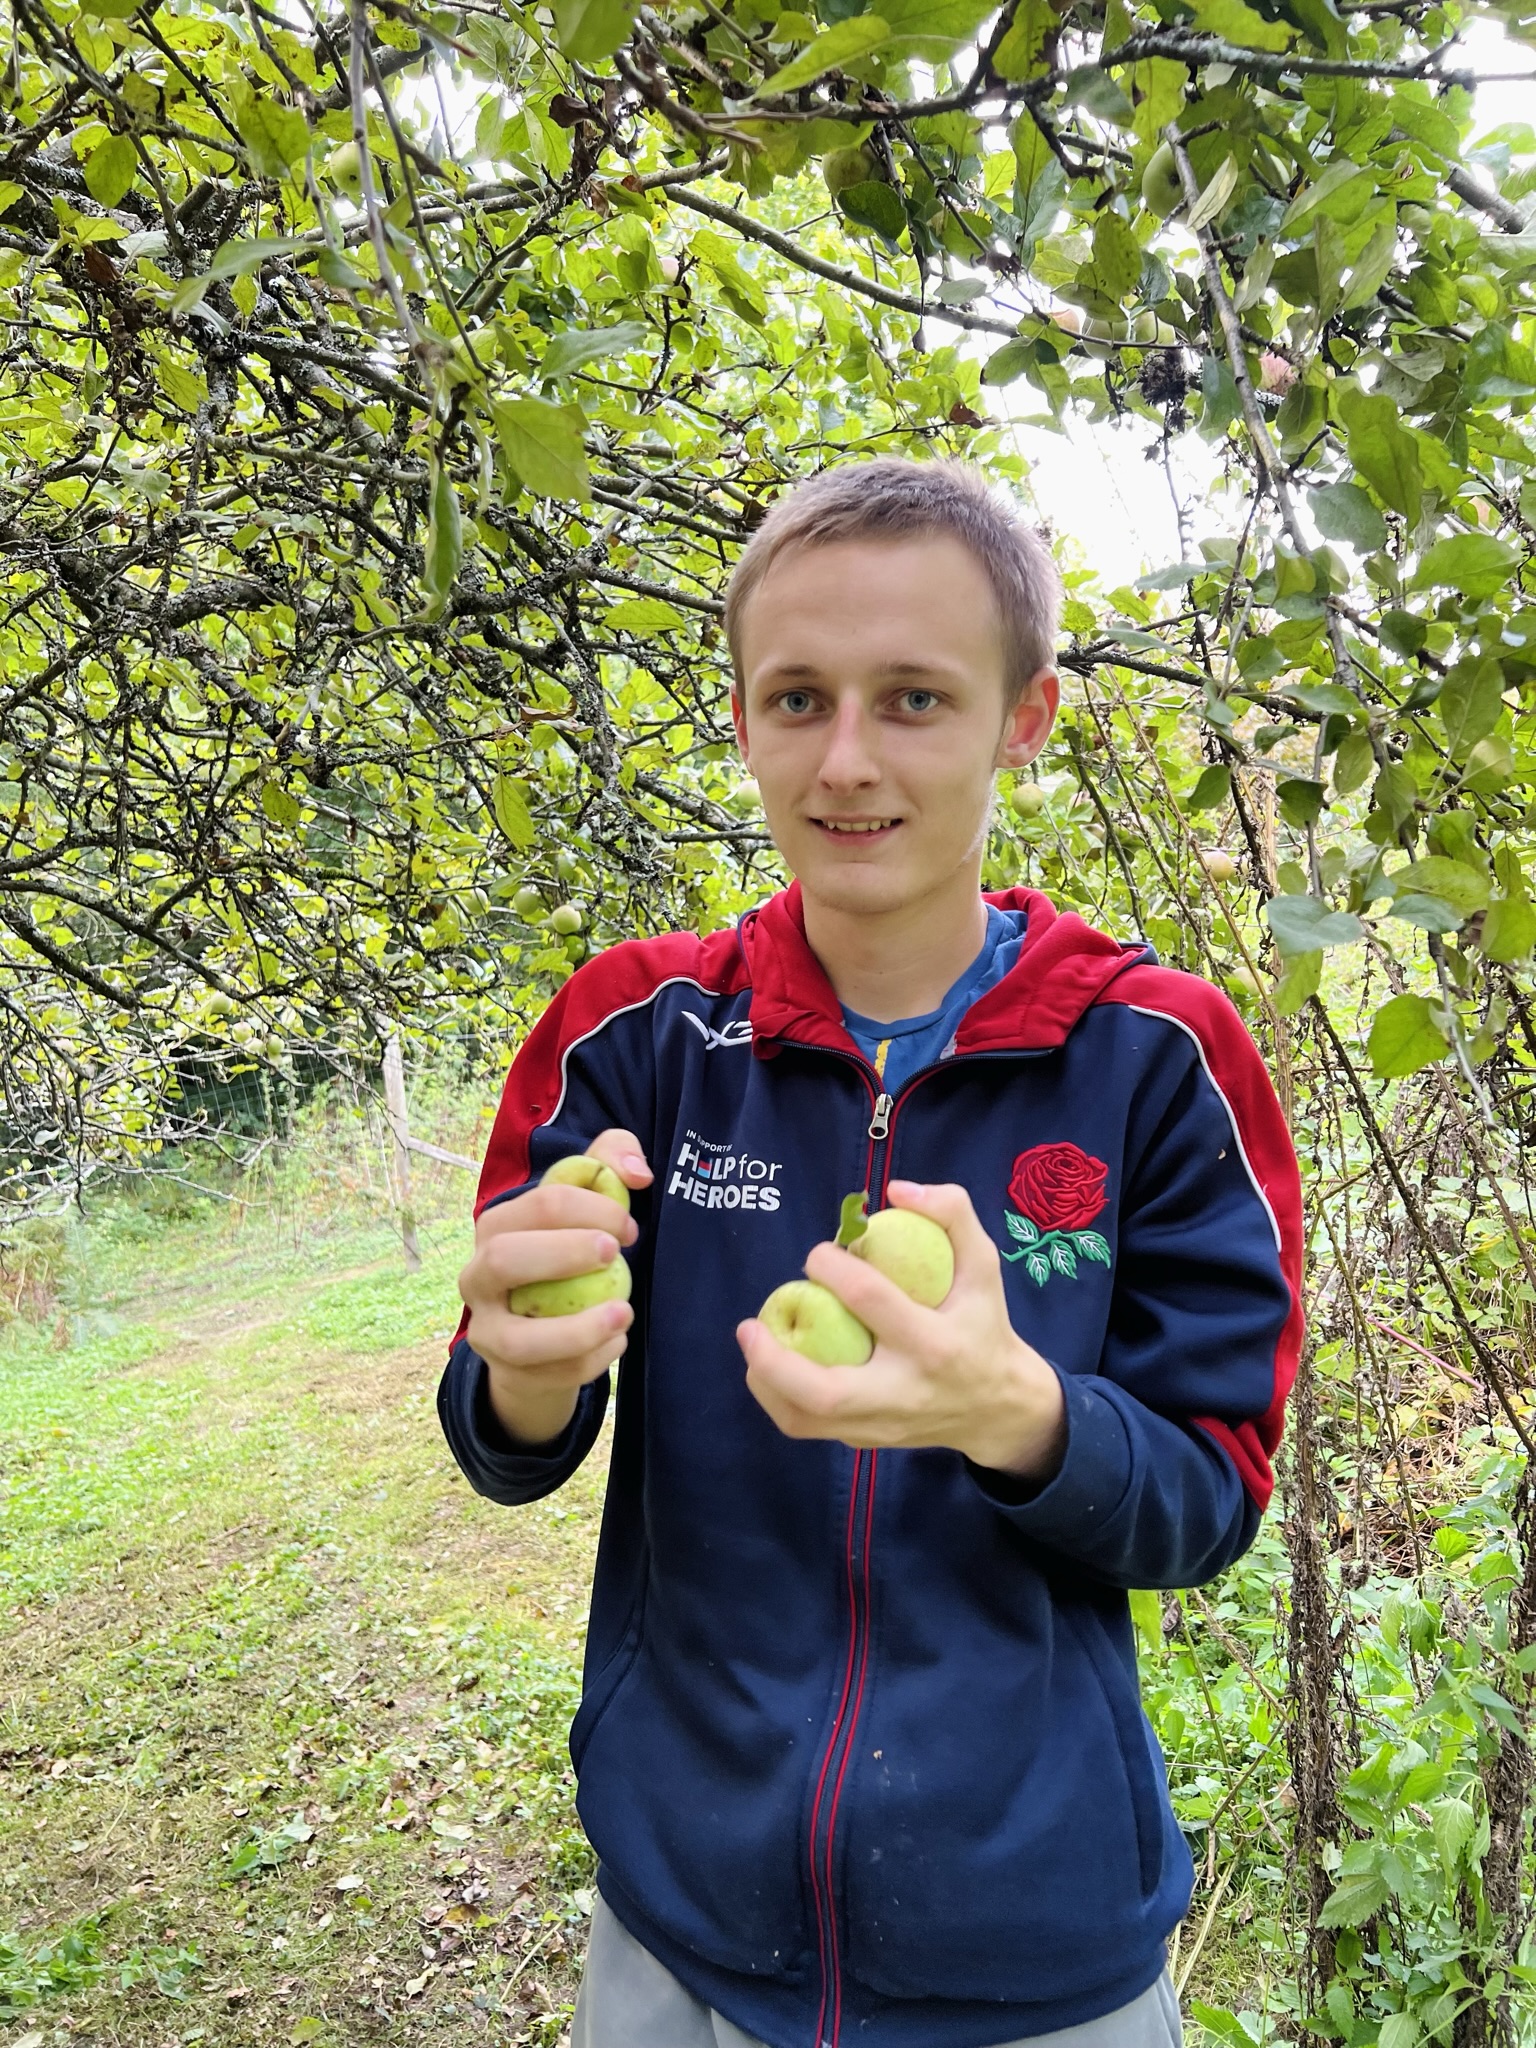 A student in our orchard gathering apples